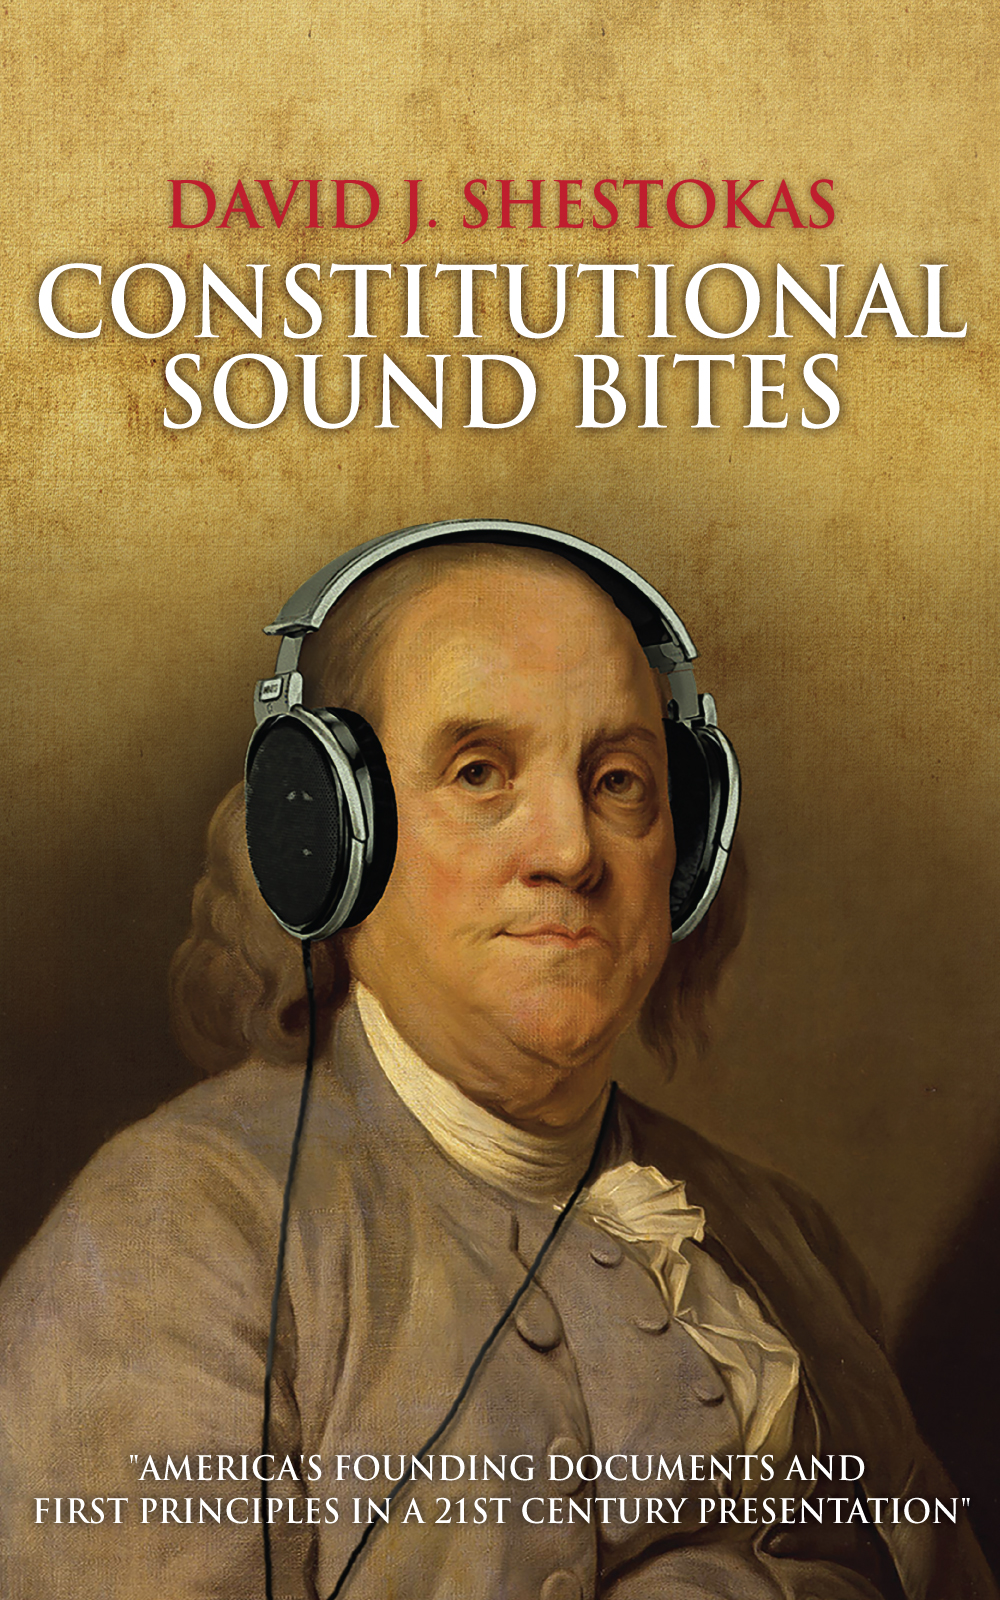 David Shestokas wrote "Constitutional Sound Bites" to help readers understand America's Founding Documents in a simple and easy to understand format.